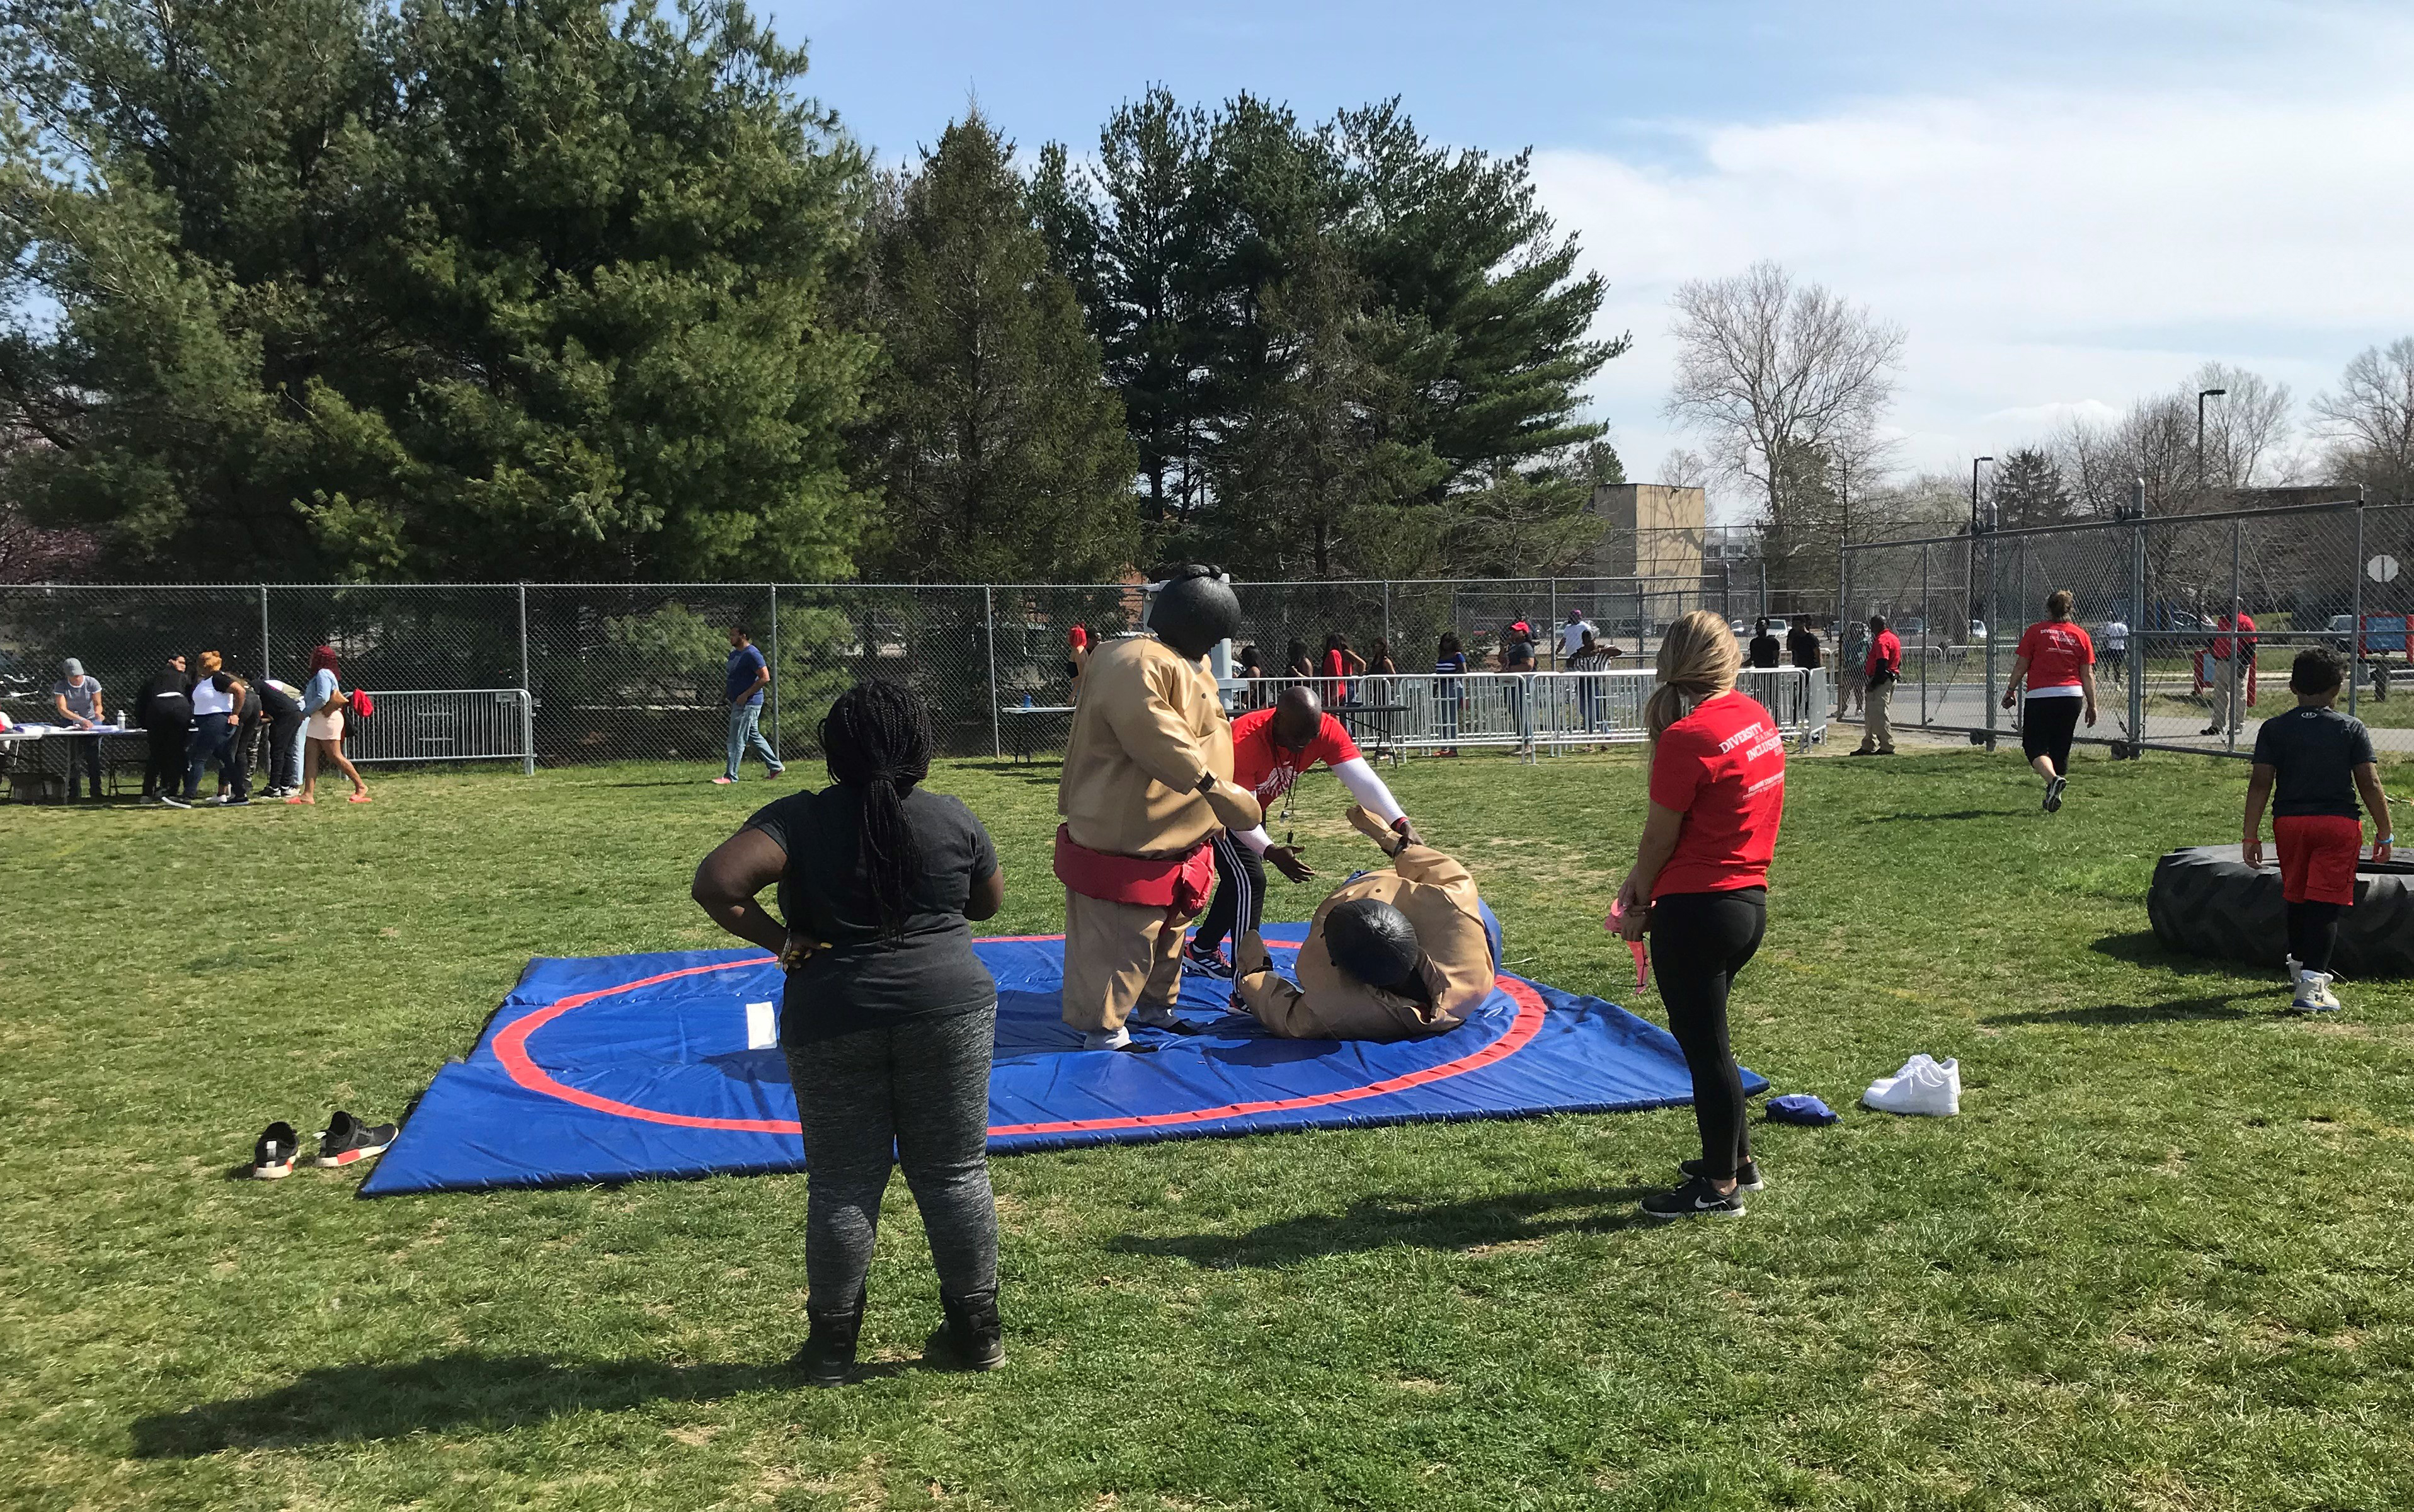 Sumo wrestling was one of the world activities that took place during the Spring Fling Carnival.